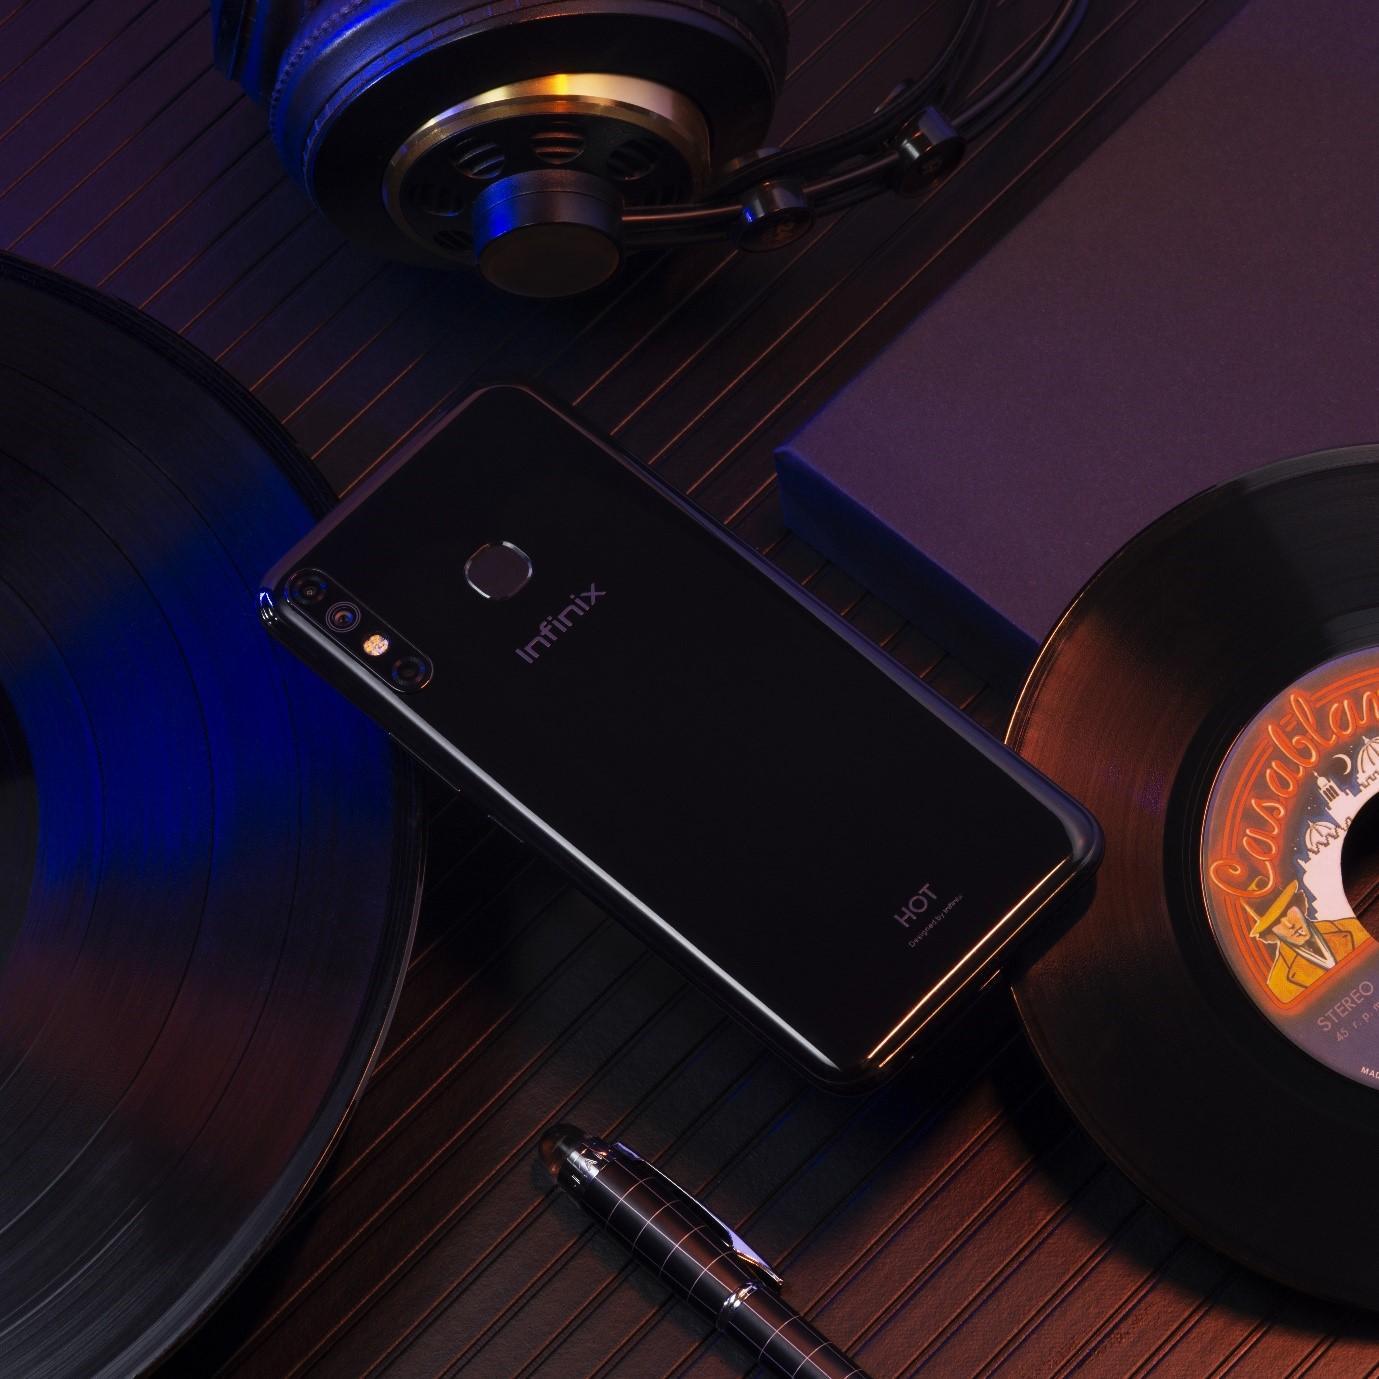 Say Hello to Infinix Hot 8, the new mid-range champion in town